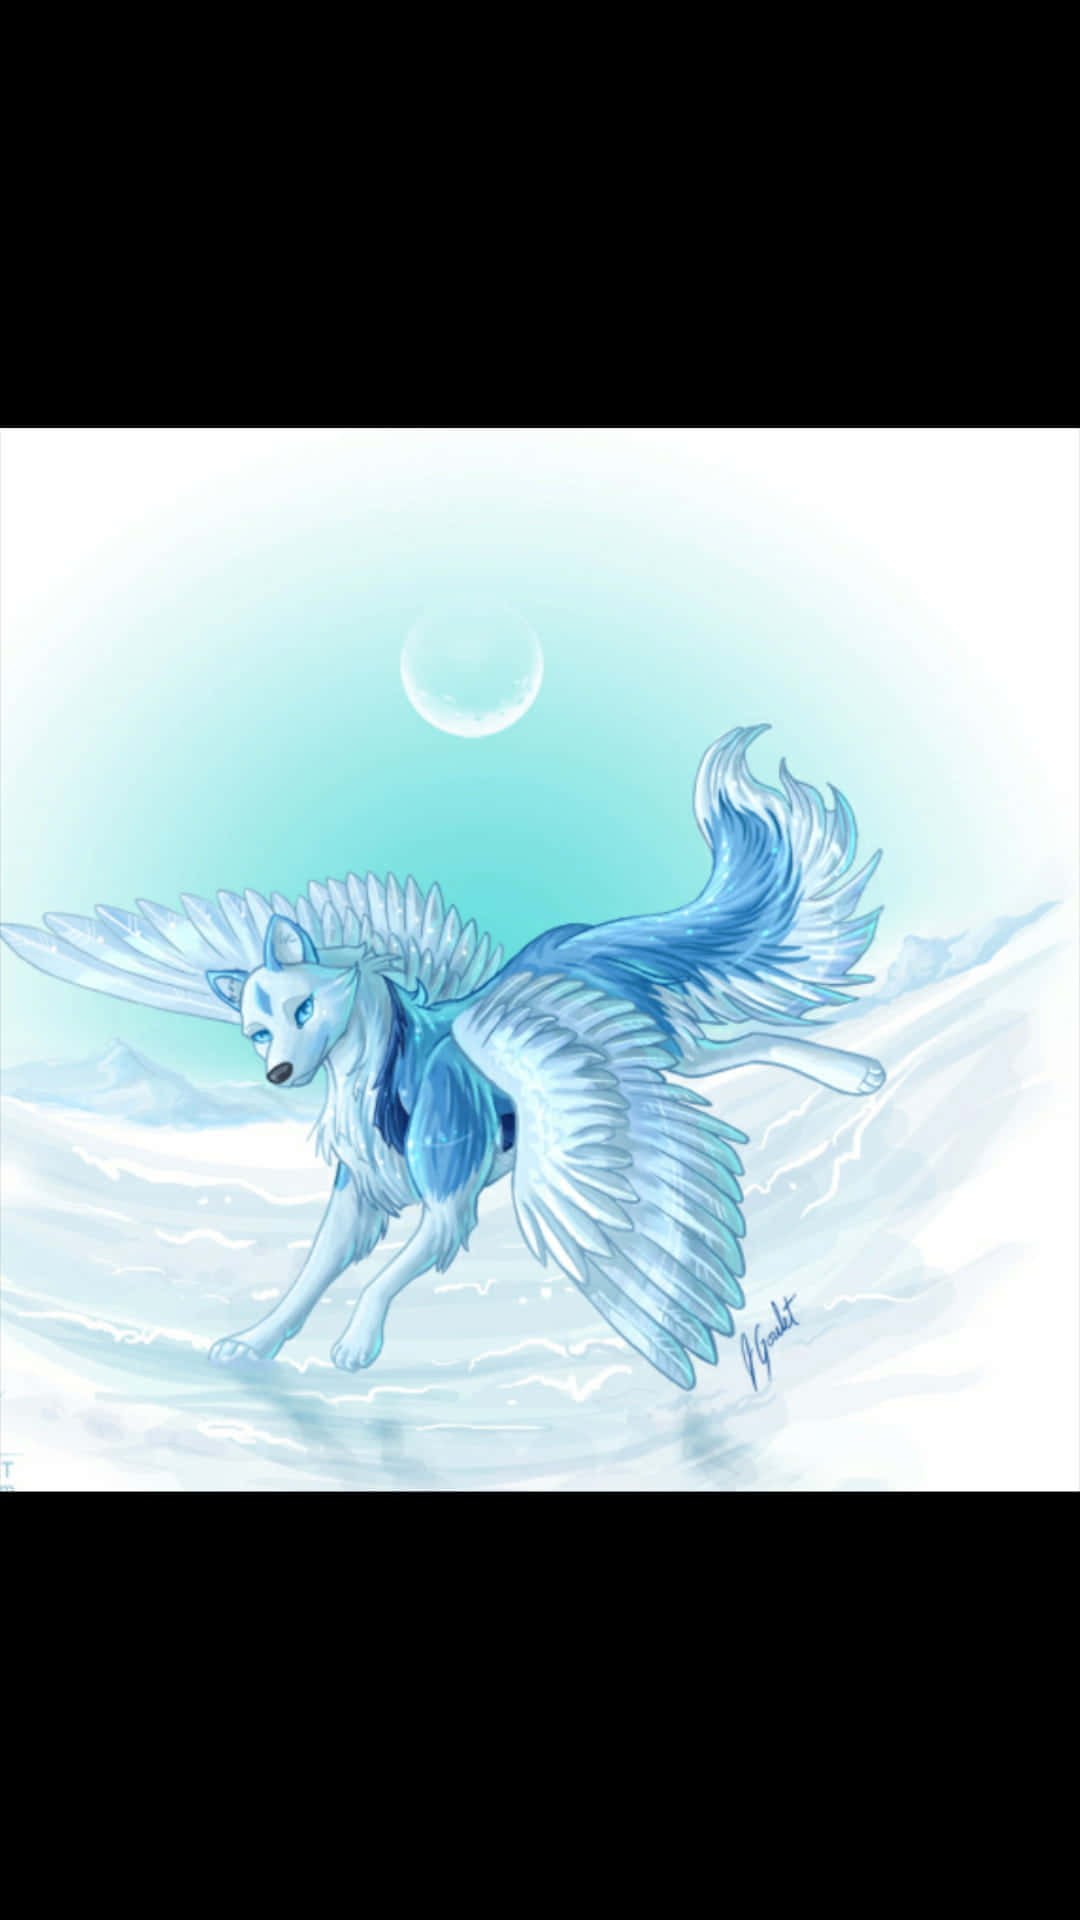 A Blue Fox With Wings Flying In The Snow Wallpaper